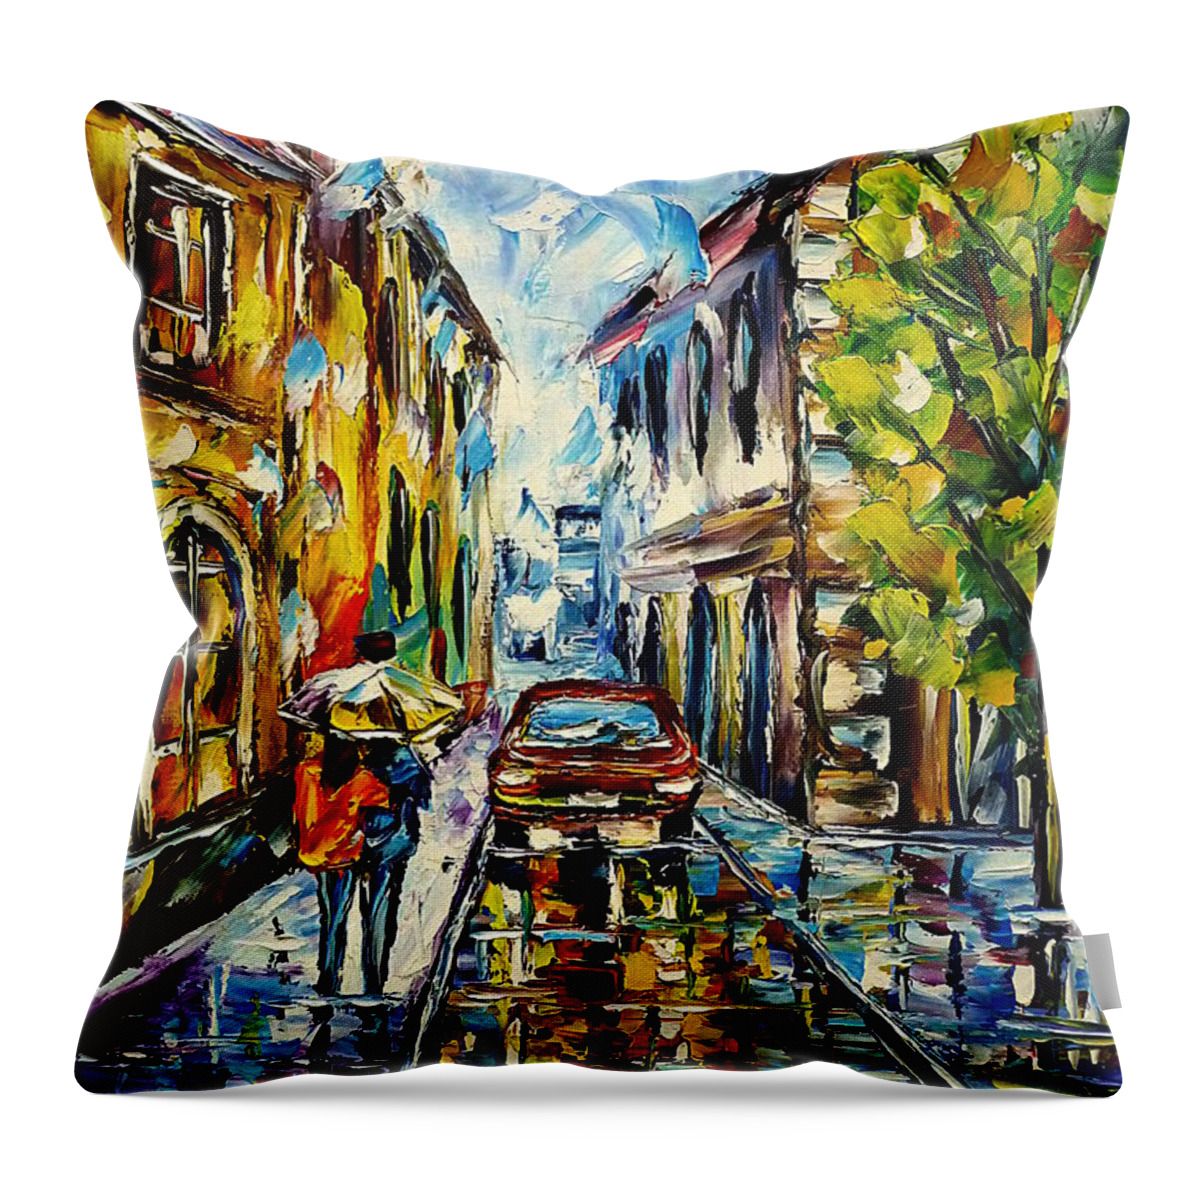 City In The Rain Throw Pillow featuring the painting Rain In The City by Mirek Kuzniar